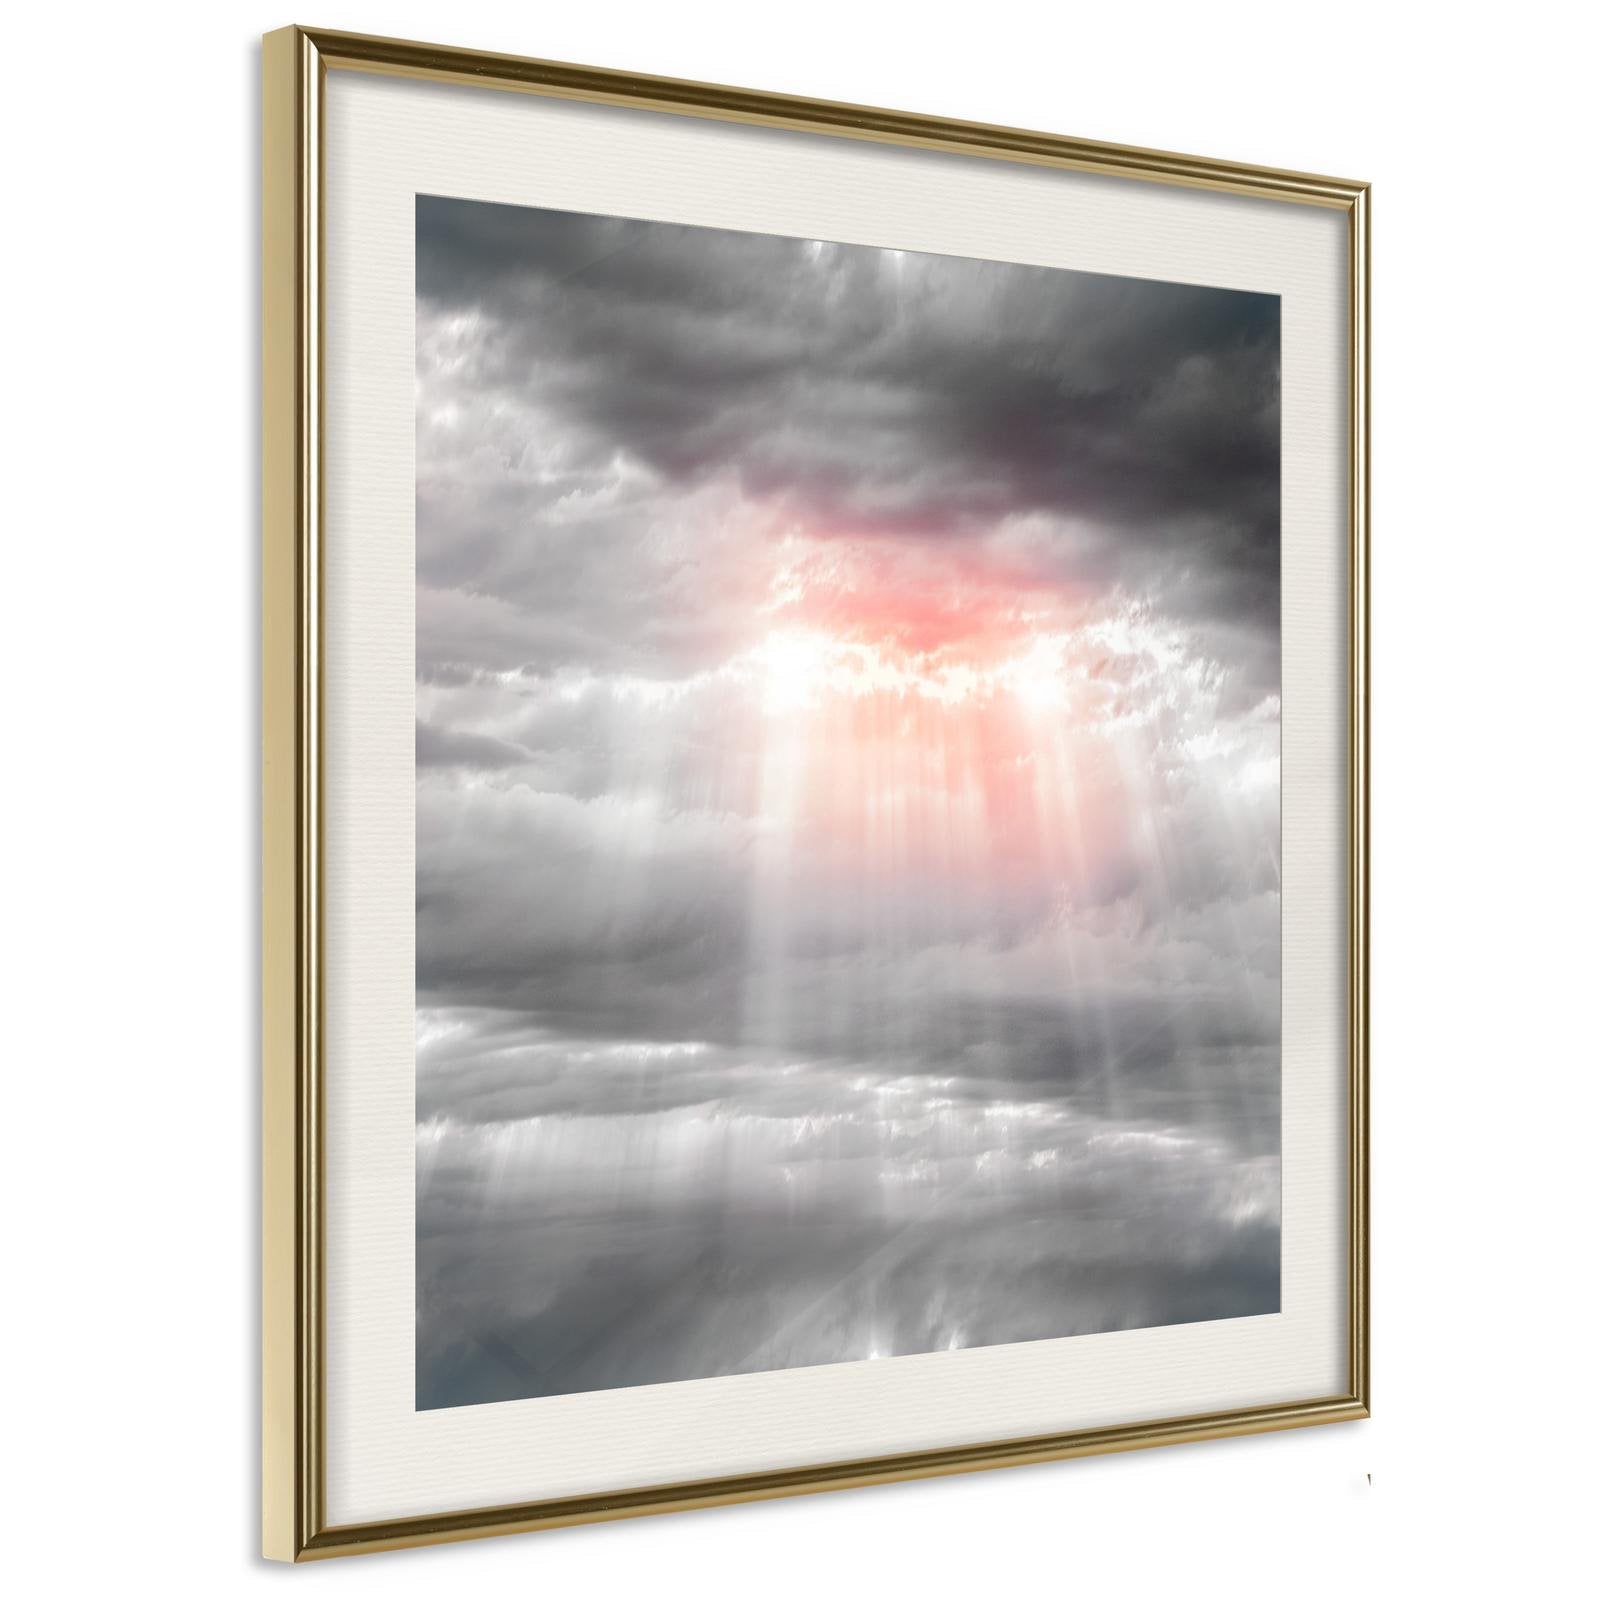 Inramad Poster / Tavla - Sign from Heaven-Poster Inramad-Artgeist-20x20-Guldram med passepartout-peaceofhome.se